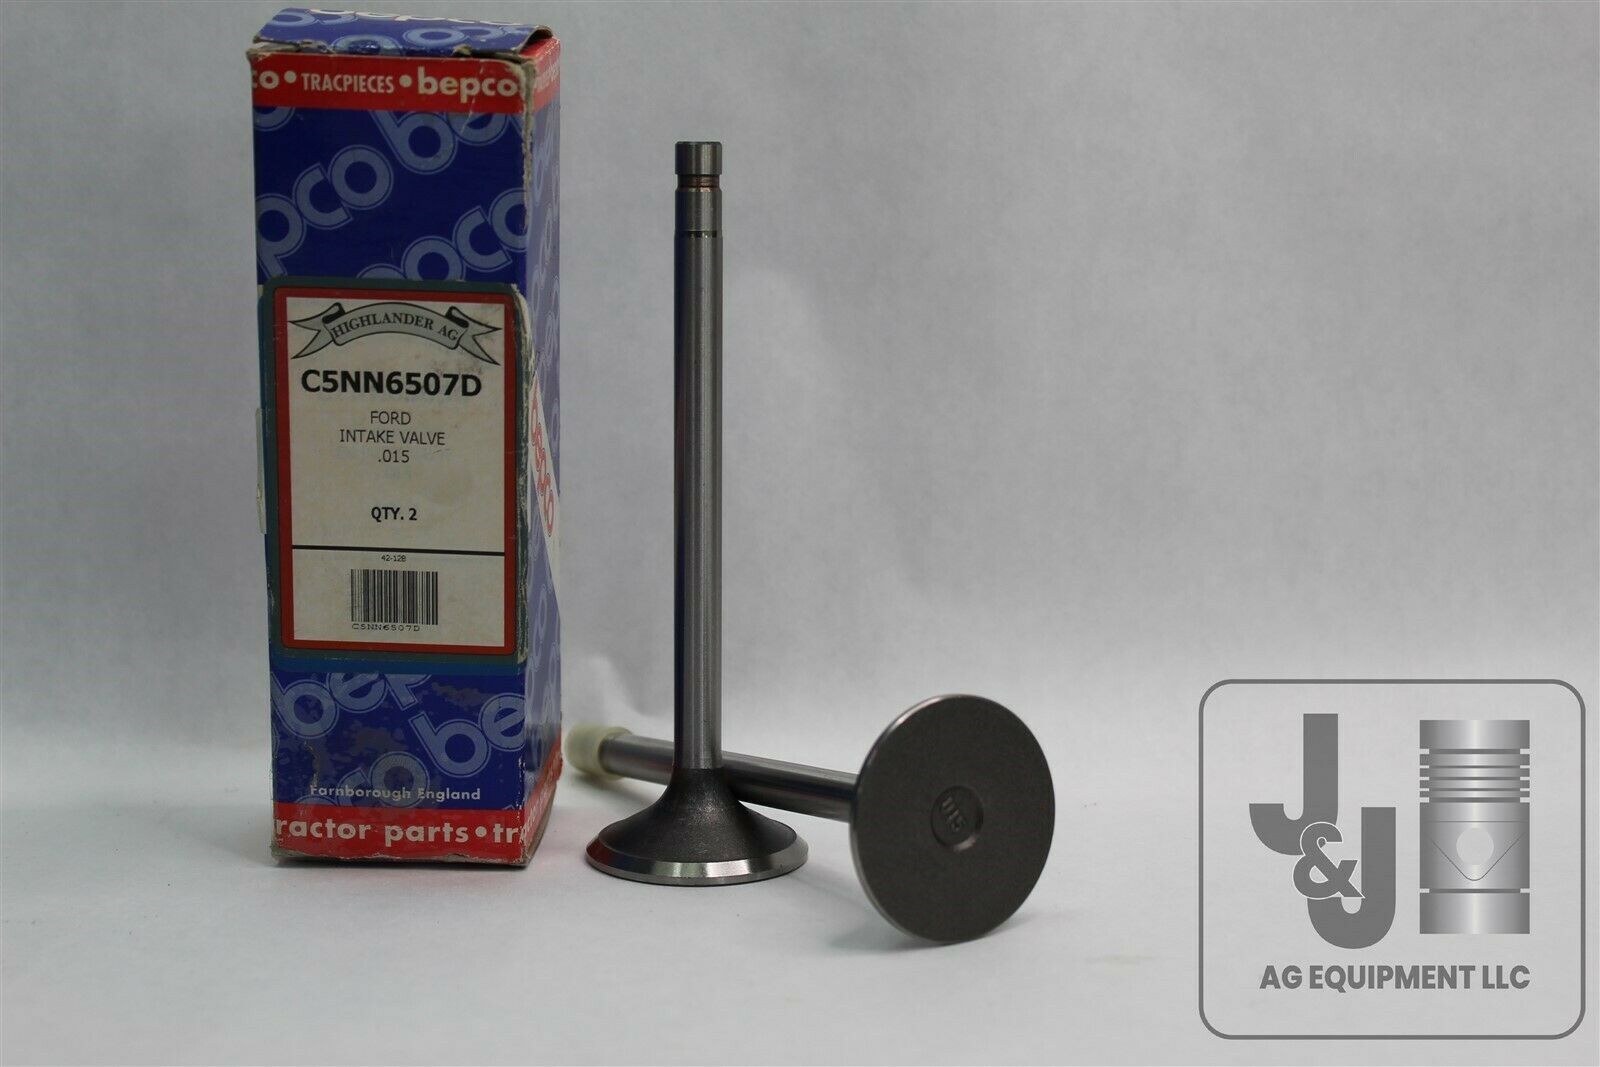 BEPCO C5NN6507D INTAKE VALVE .015 PAIR FITS FORD 3500 3150 3330 TRACTOR